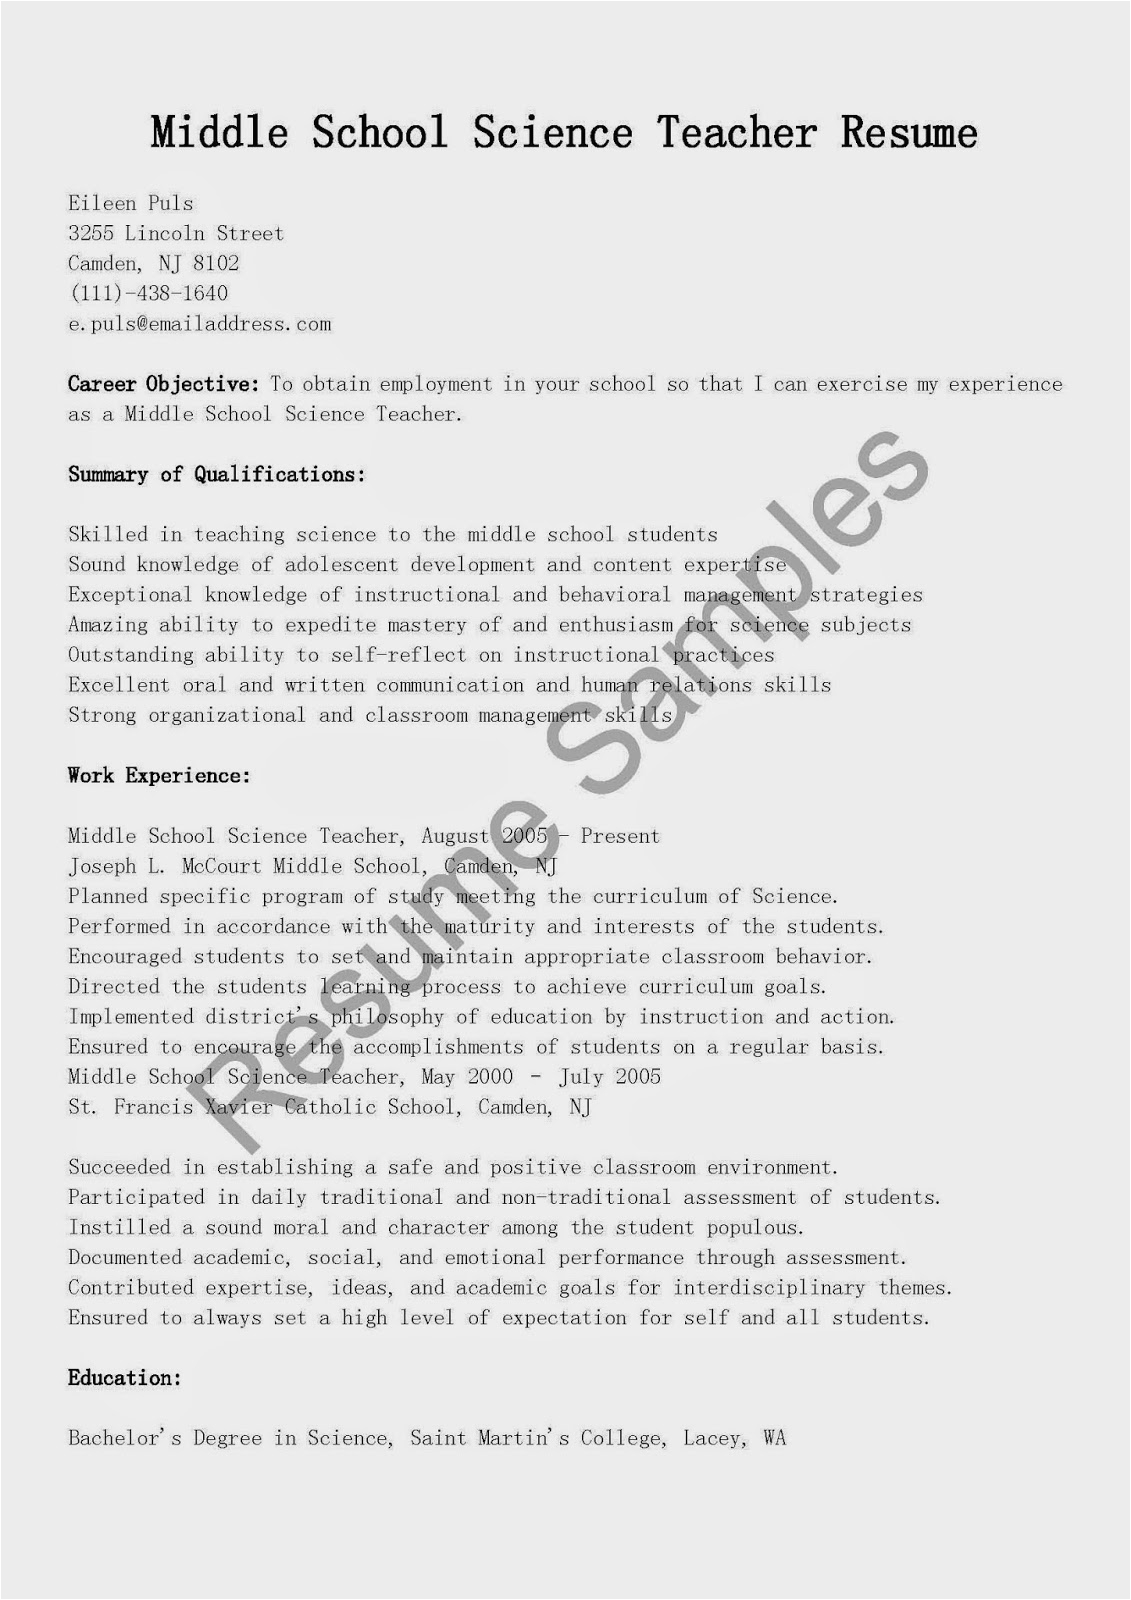 Resume Template for Middle School Students Resume Samples Middle School Science Teacher Resume Sample